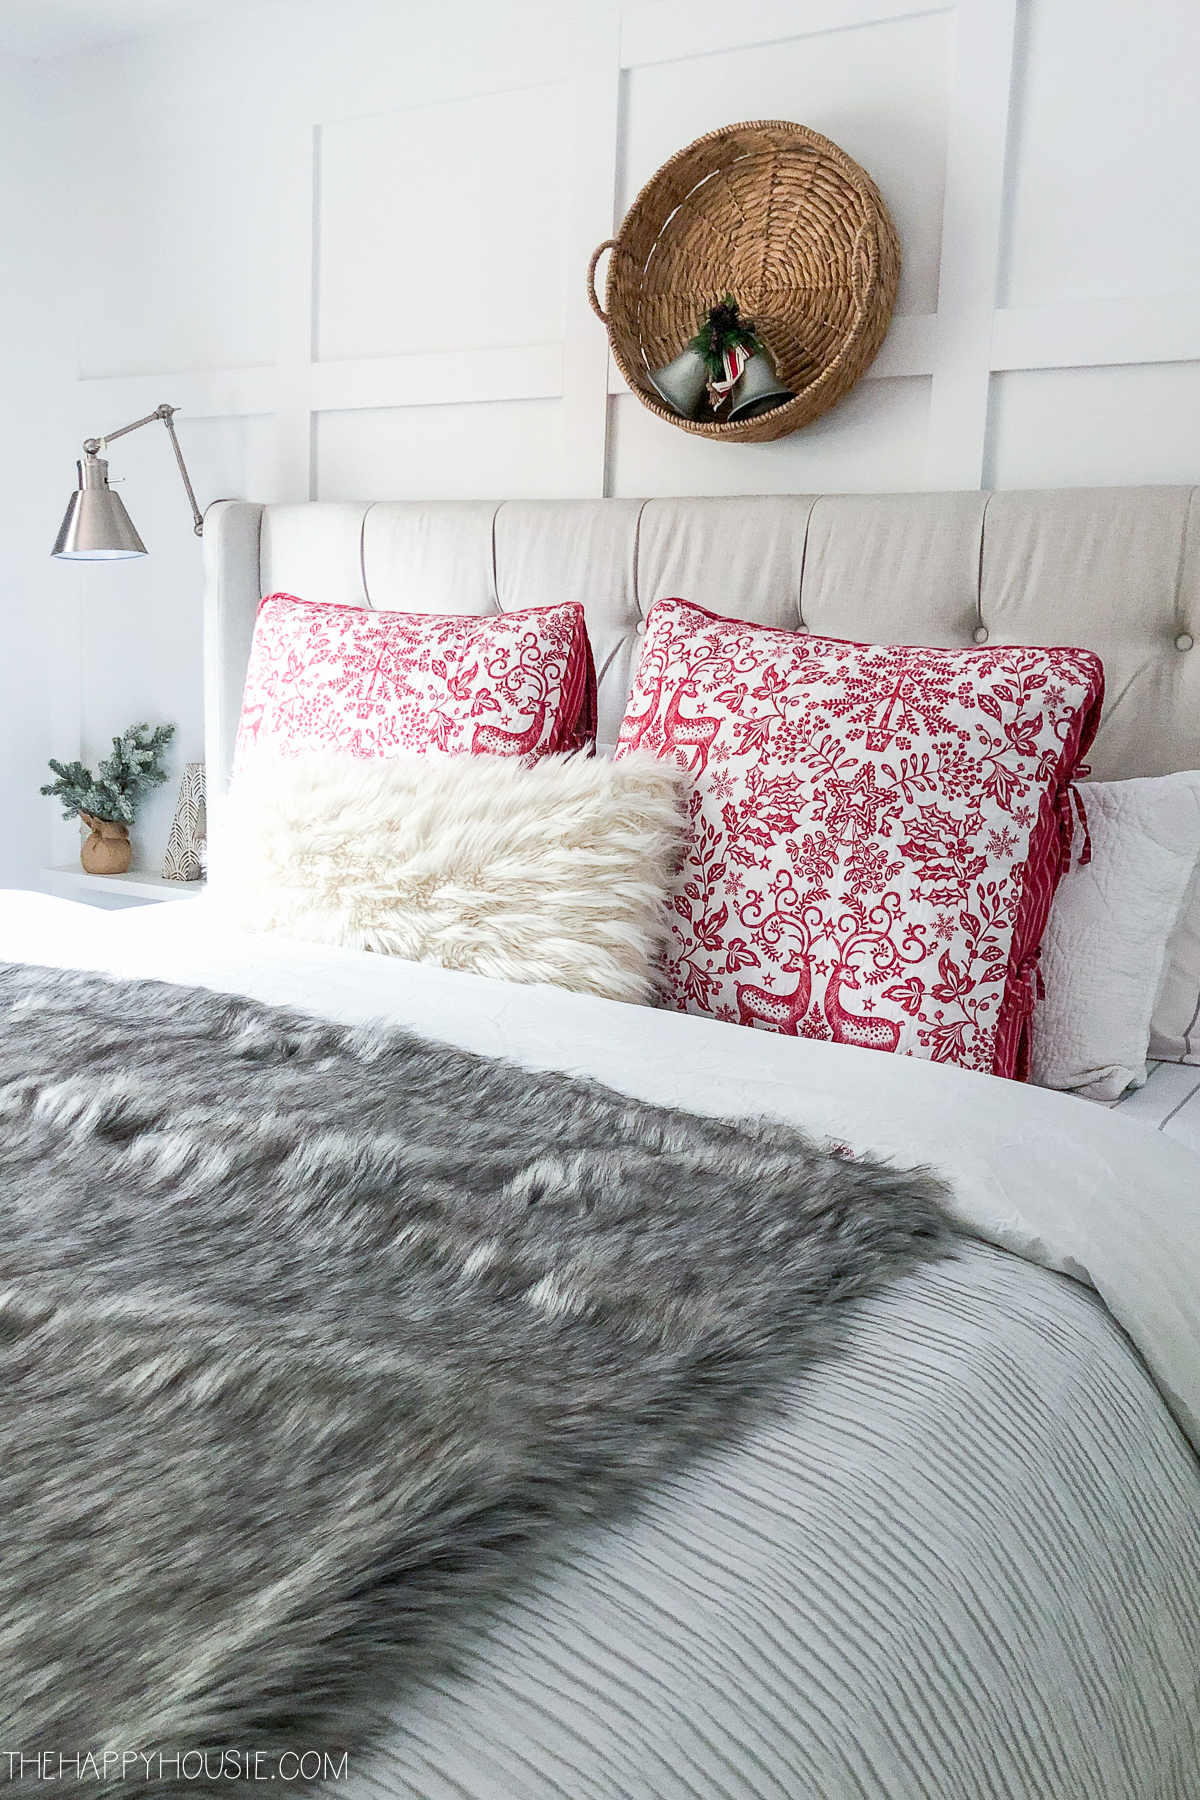 Red and white throw pillows are on the bed.